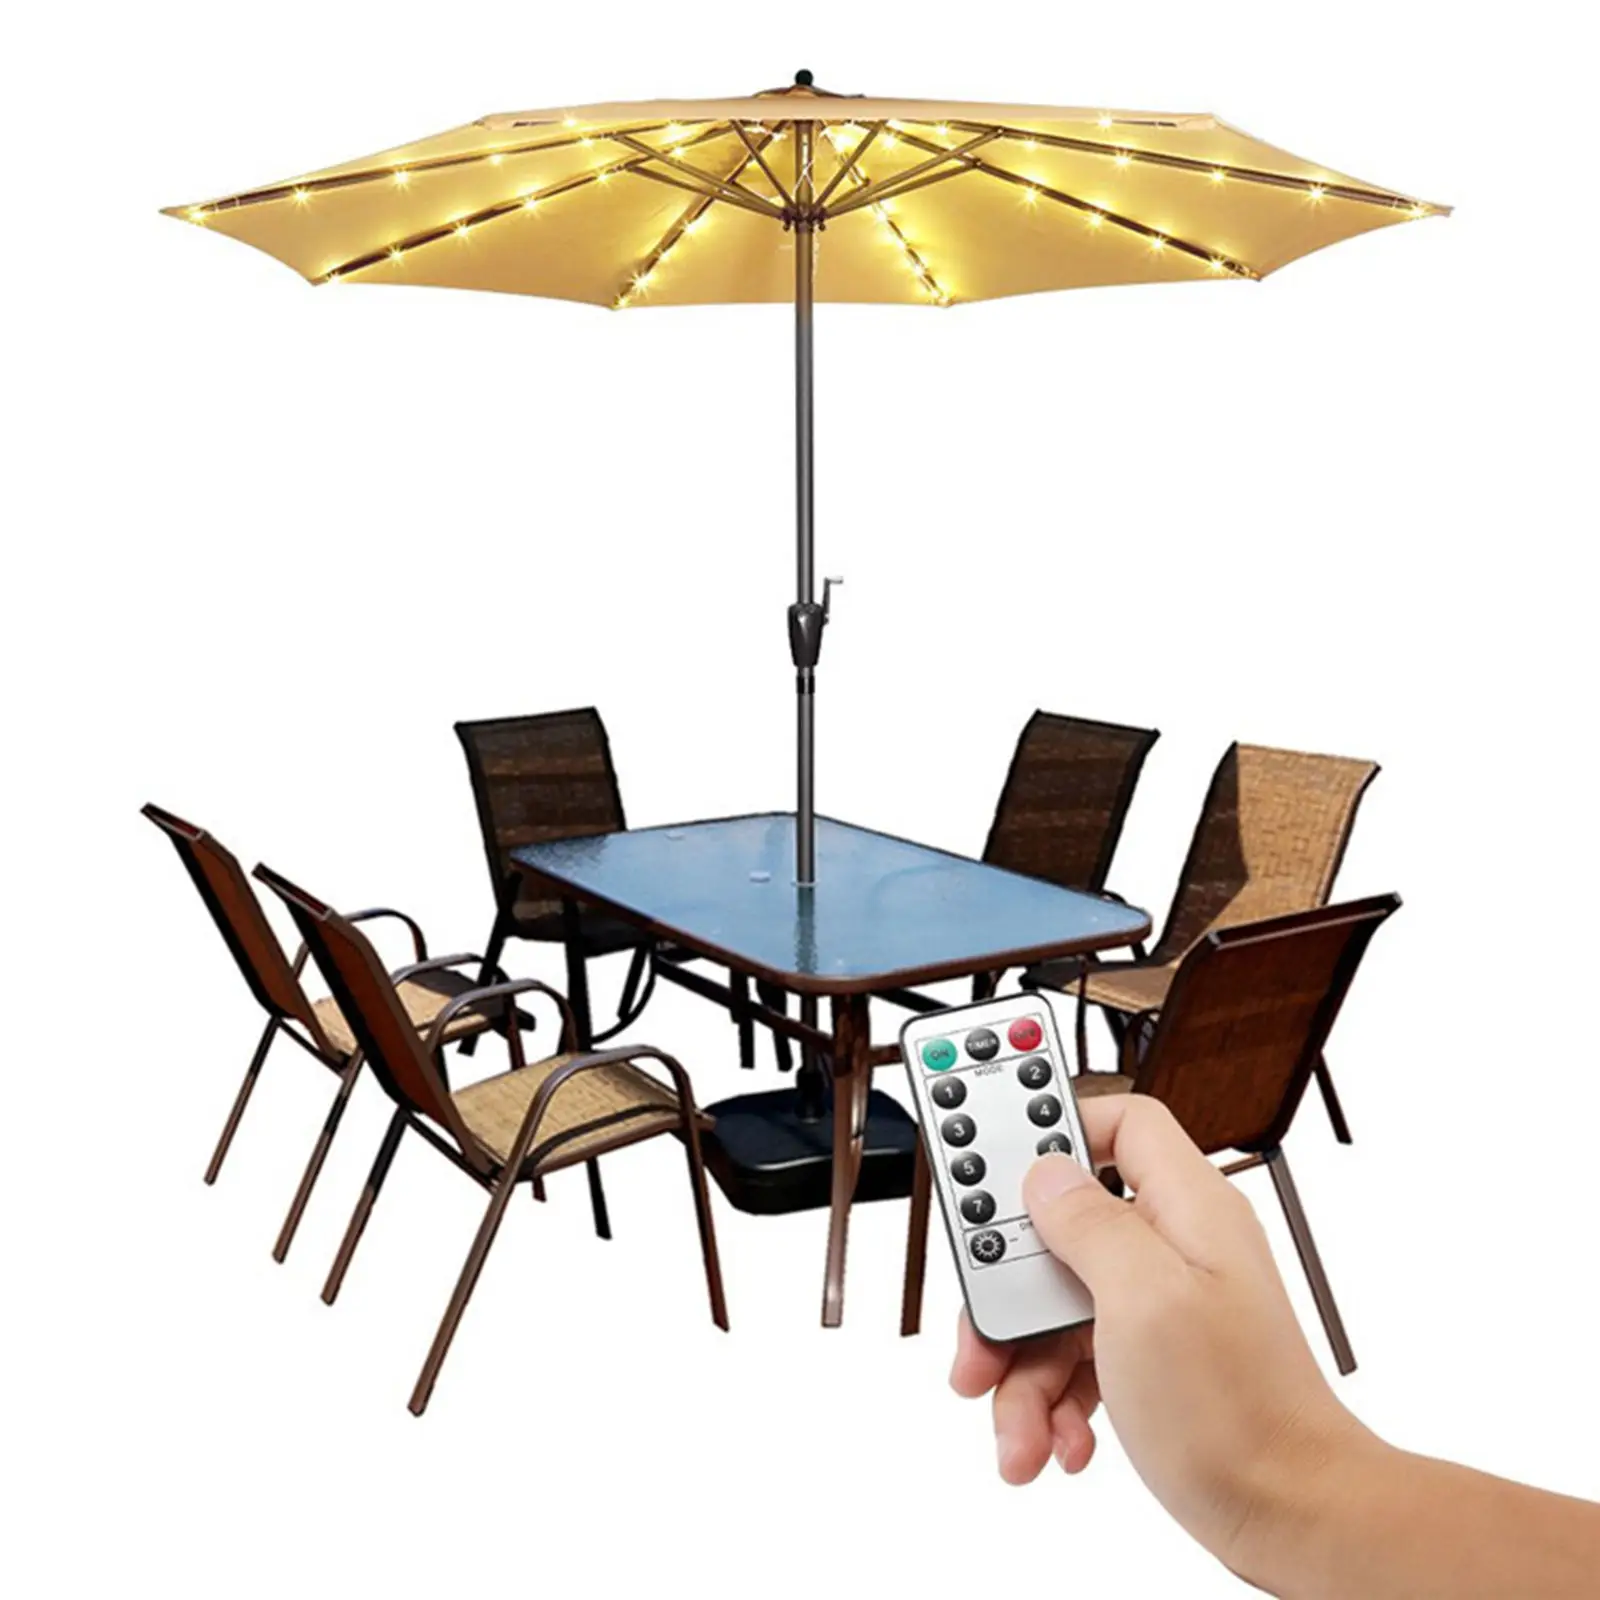 Beach Umbrella Parasol String Light 104 LED Camping Tents Umbrella Pole Fairy Light with Remote Control Outdoor Lighting